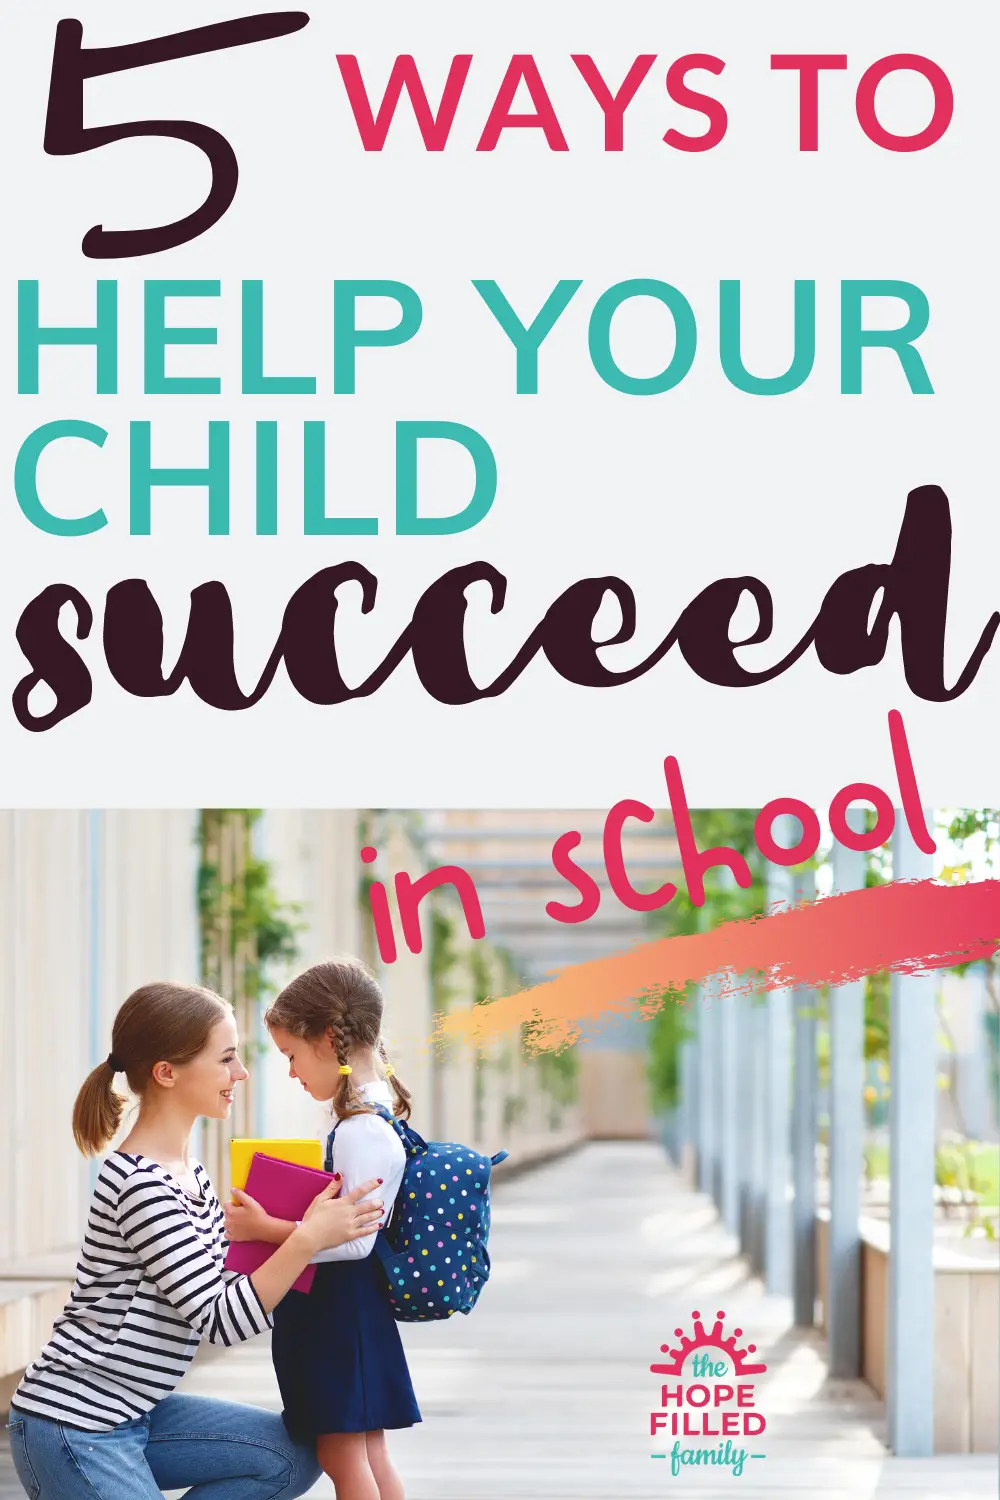 How can I help my child do well at school? What are the secrets of a great relationship with my child's school? 5 tips from a teacher-parent.